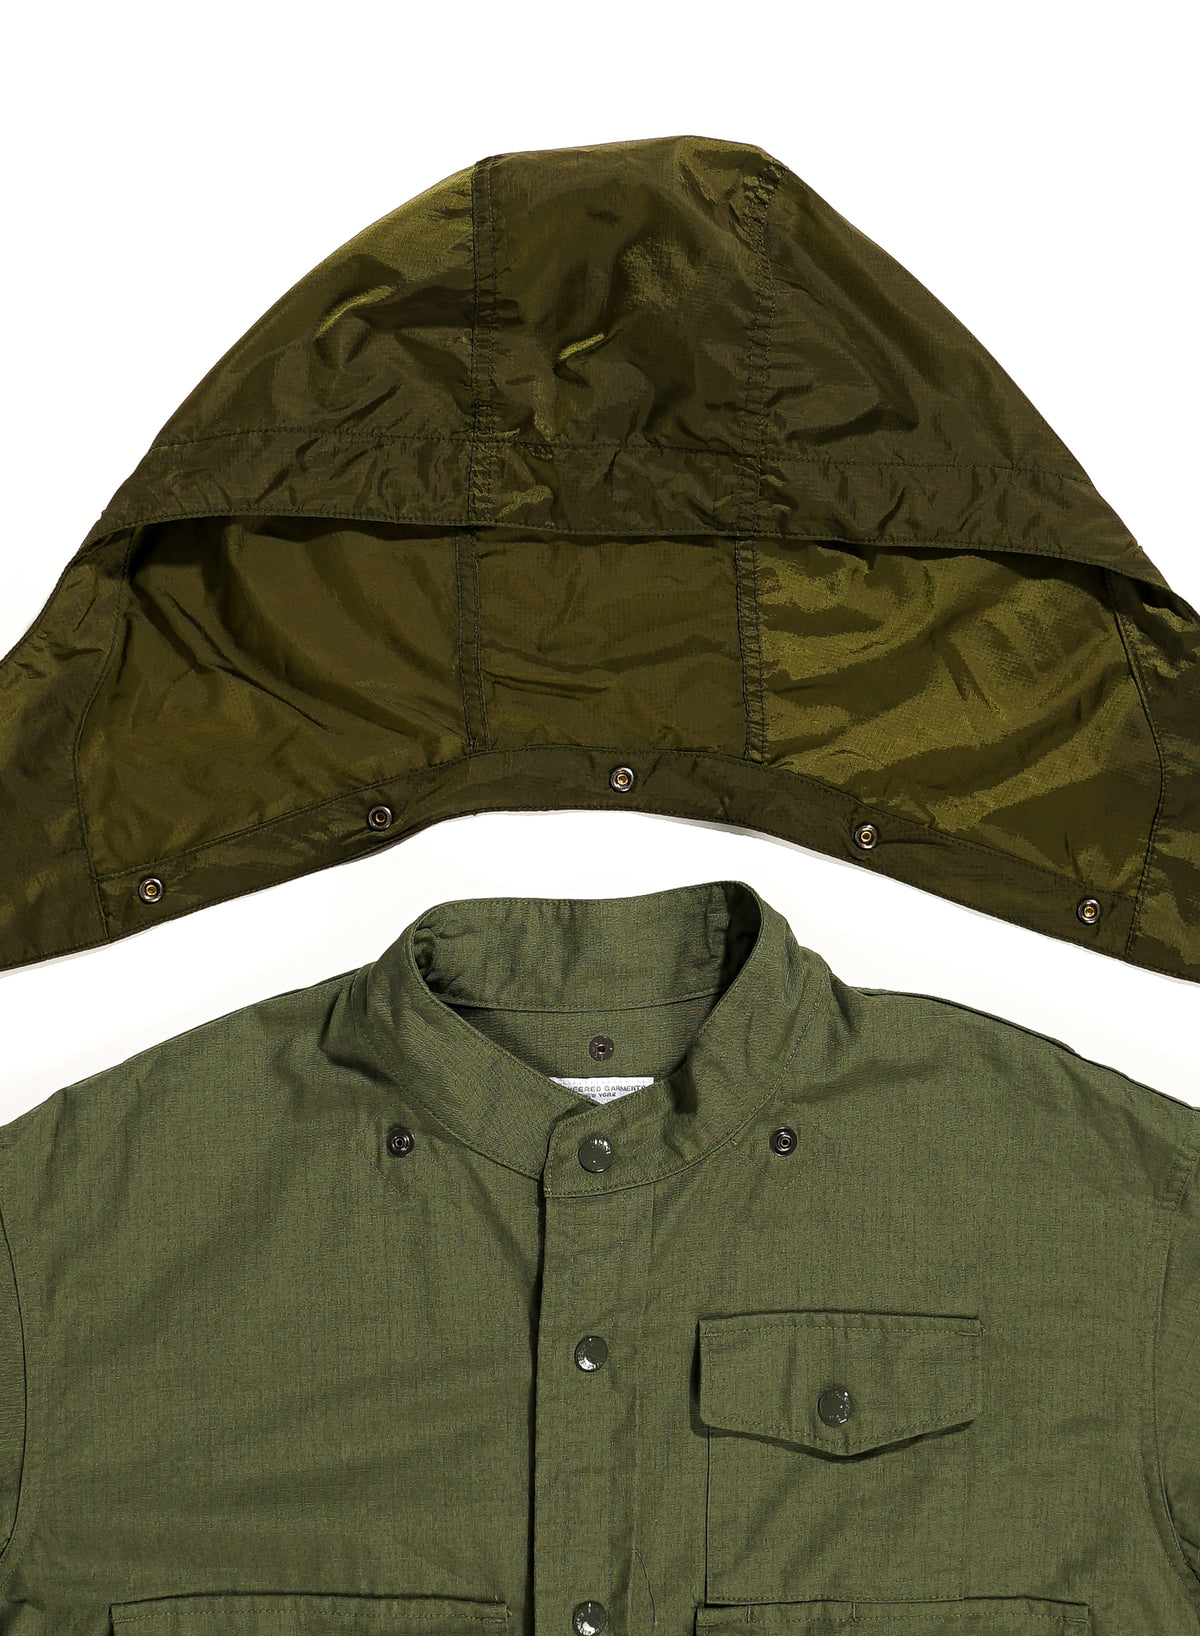 Cruiser Jacket - Olive Cotton Ripstop | Nepenthes New York